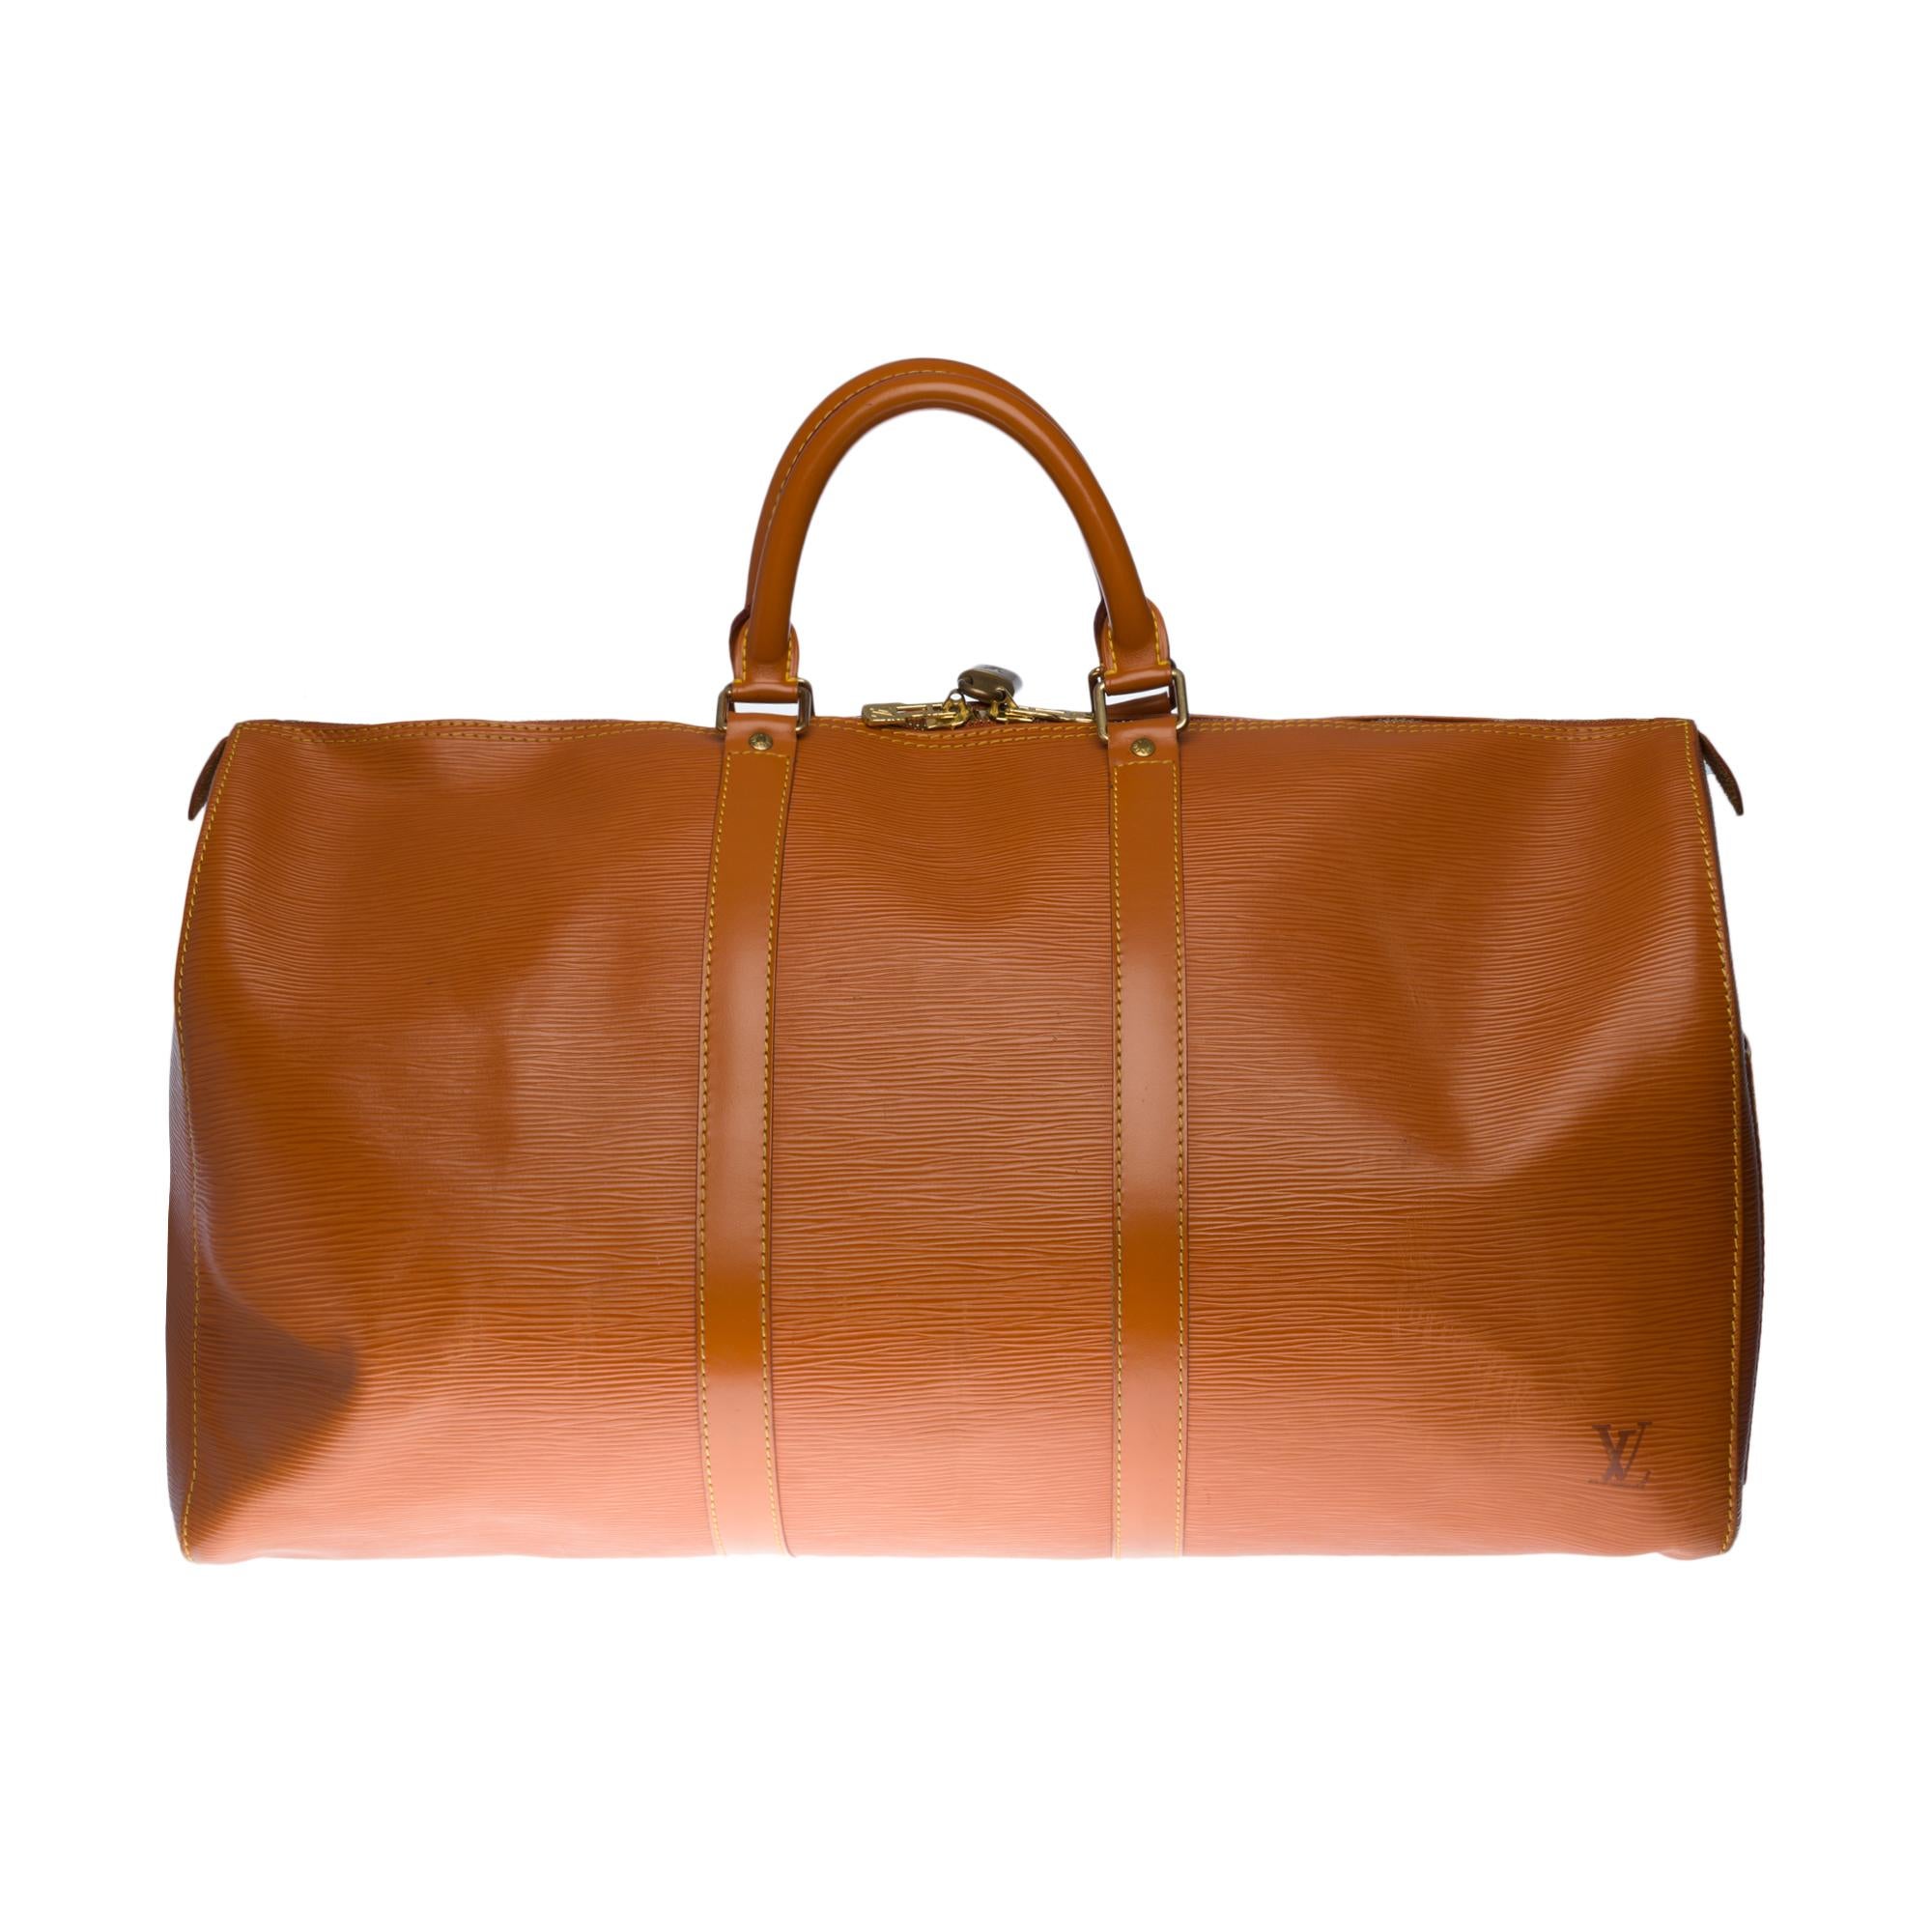 The indispensable Louis Vuitton Keepall travel bag 50 cm in cognac epi leather, gold metal hardware, double handle in cognac leather allowing a handheld

Double zipper
Lining in cognac suede
Signature: 